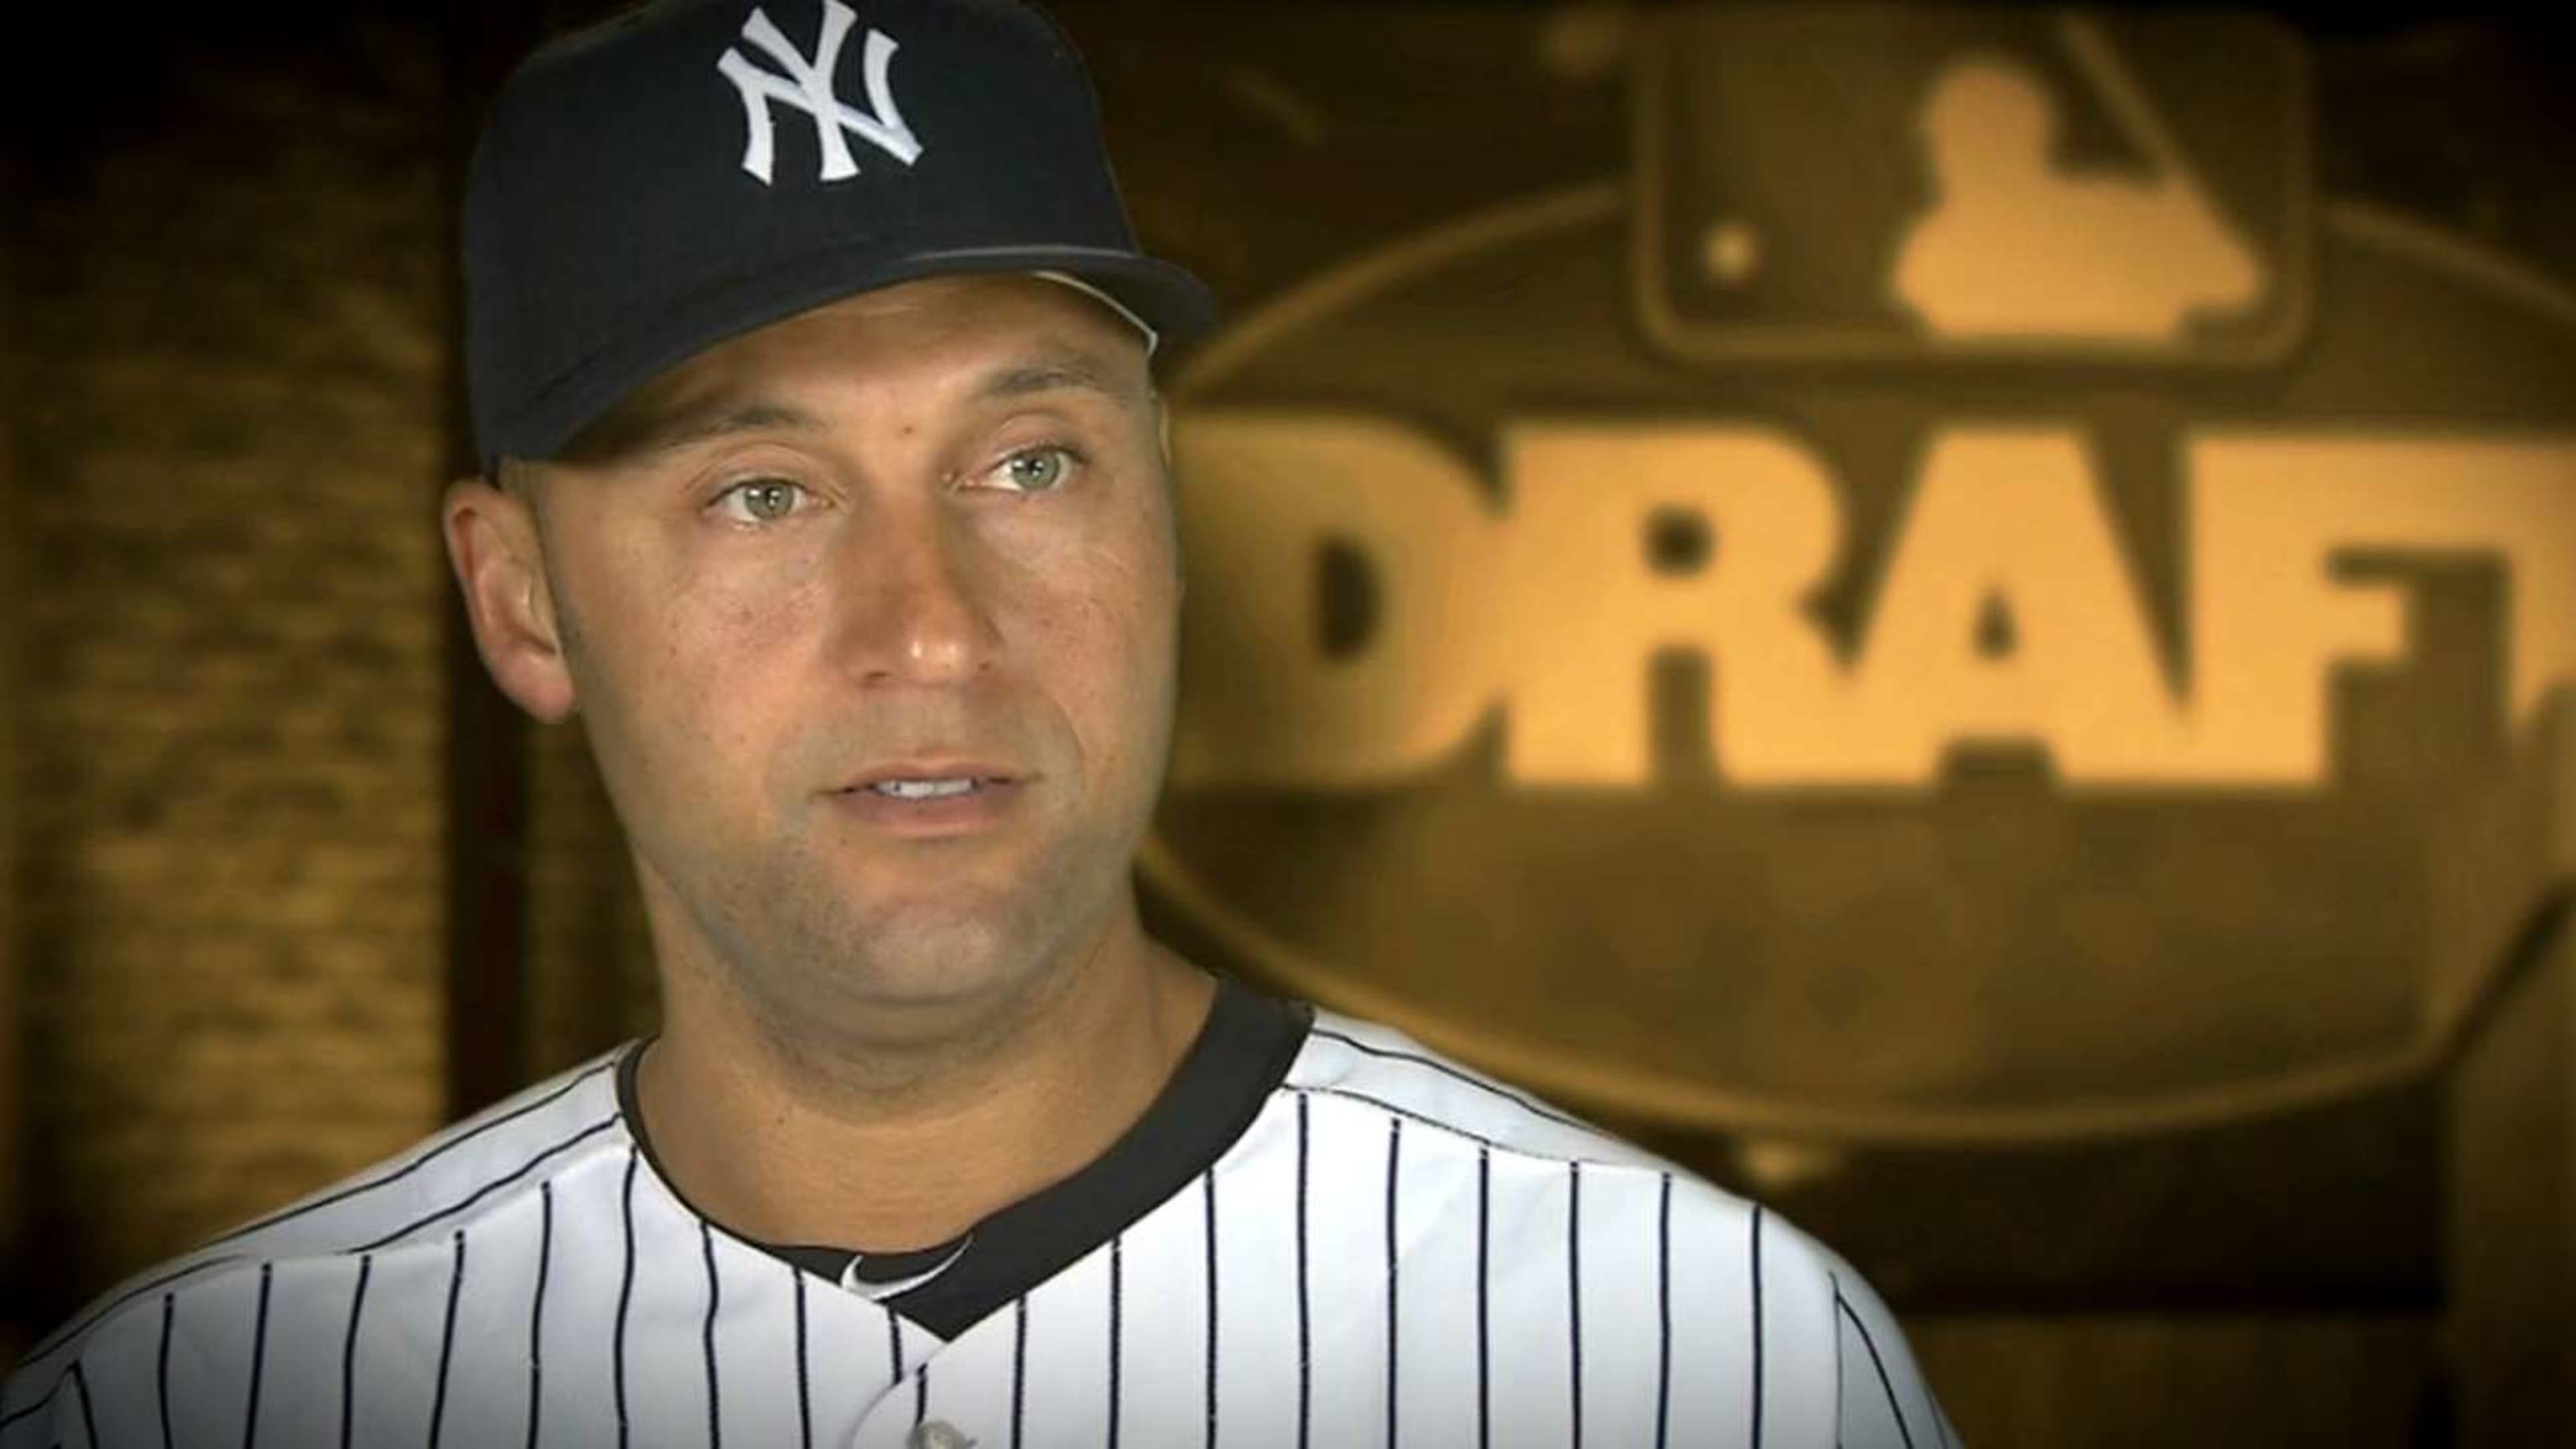 The Captain': Derek Jeter expected to be drafted 1st by Astros or 5th by  Reds in 1992